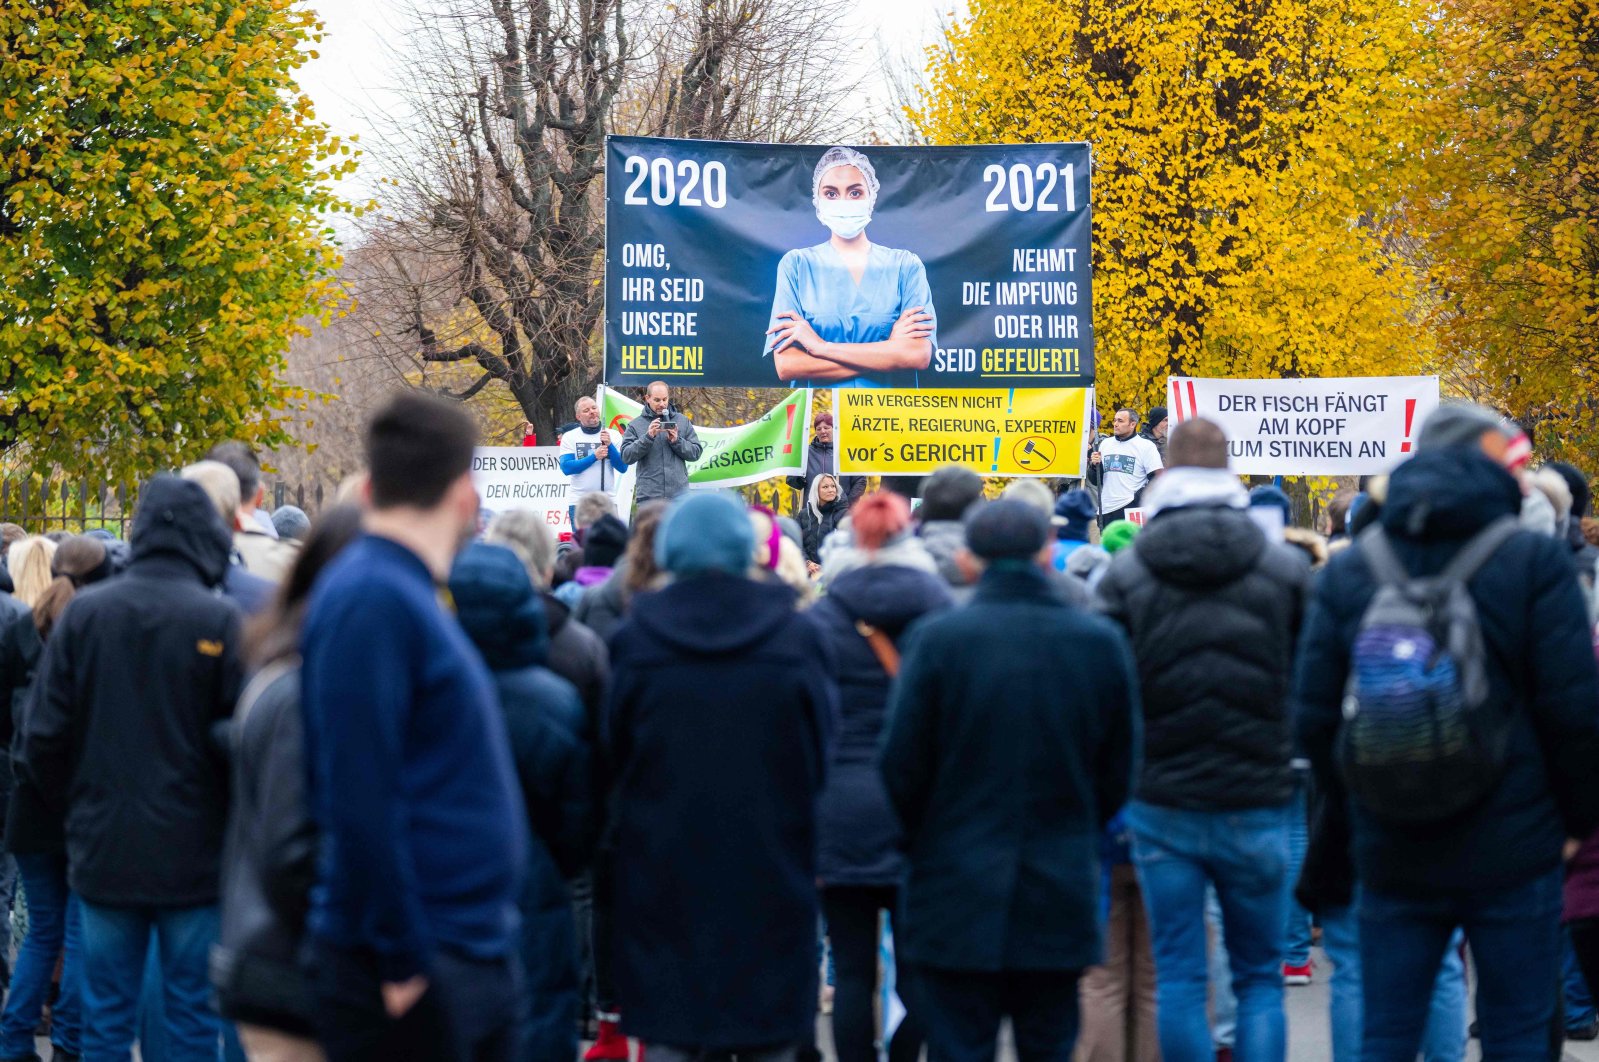 People take part in a protest of anti-vaccination activists after a coronavirus crisis summit held by the government in Vienna, Austria, Nov. 14, 2021. (AFP Photo)